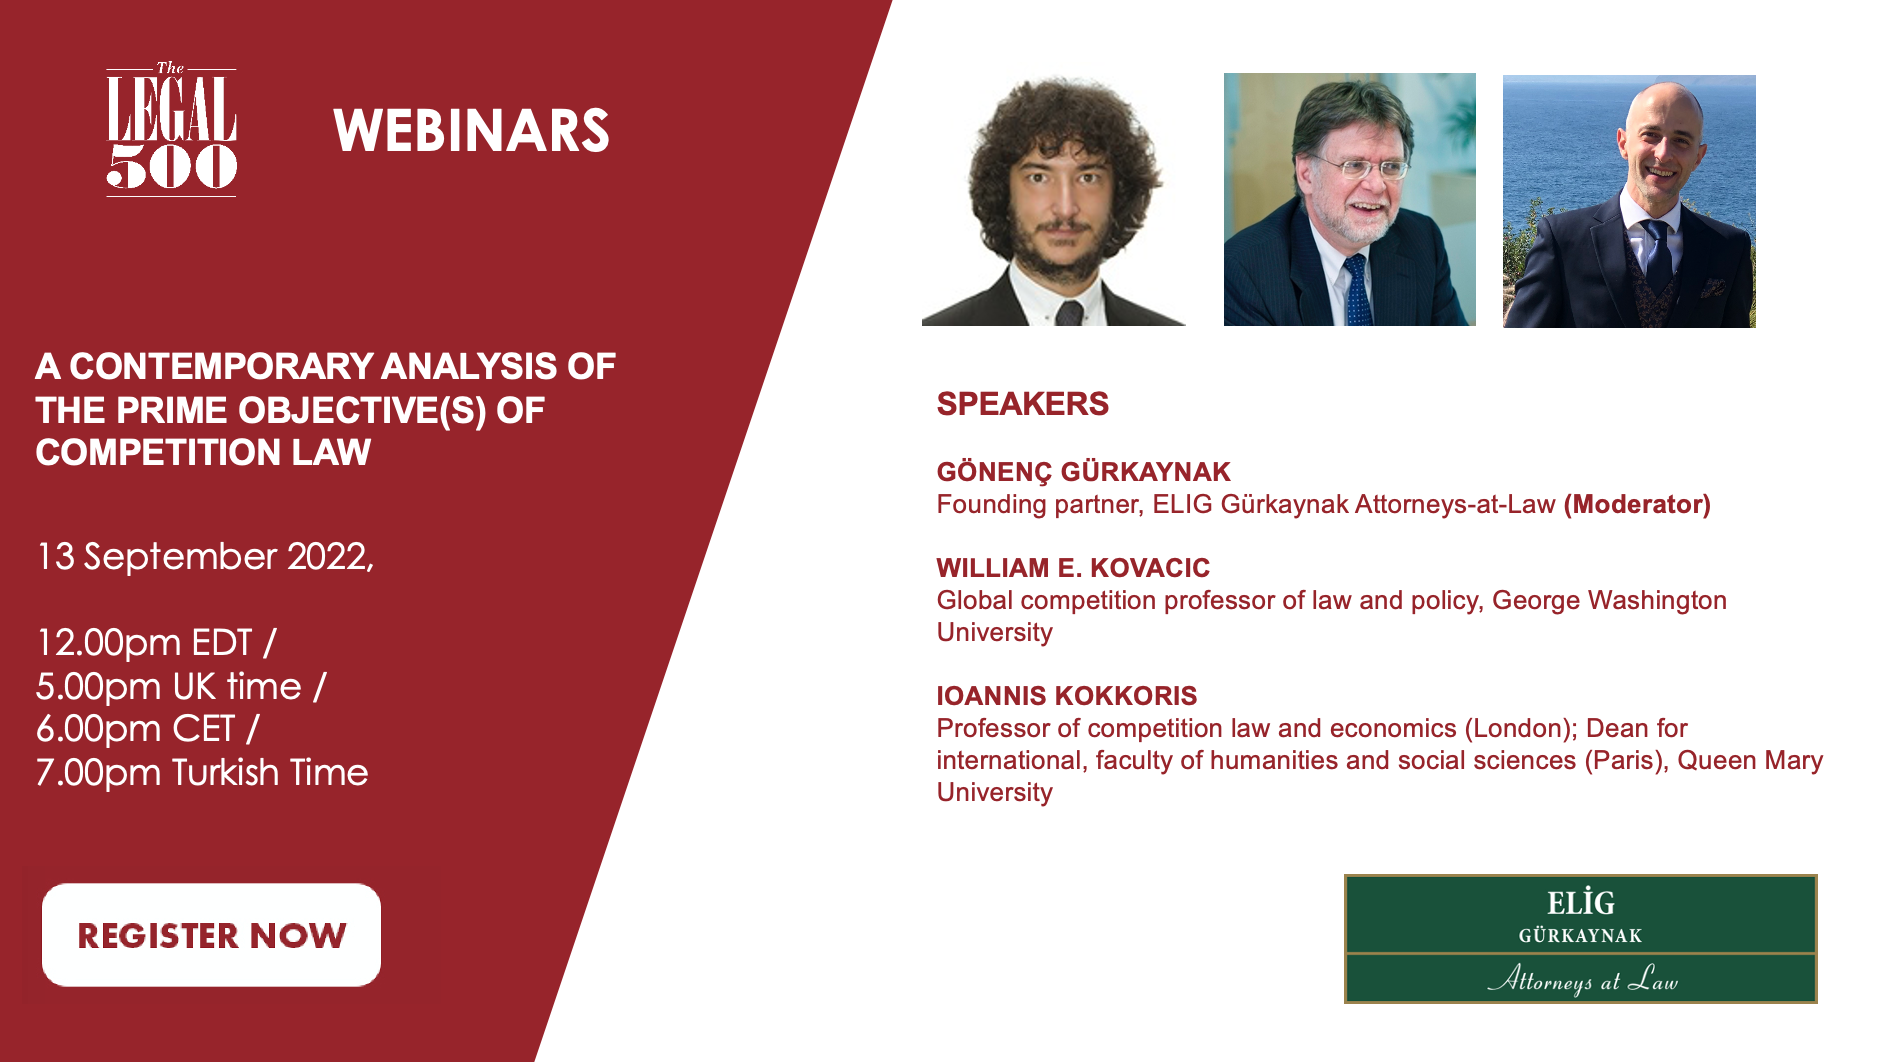 The Legal 500 Webinar “A Contemporary Analysis of the Prime Objective(s) of Competition Law”